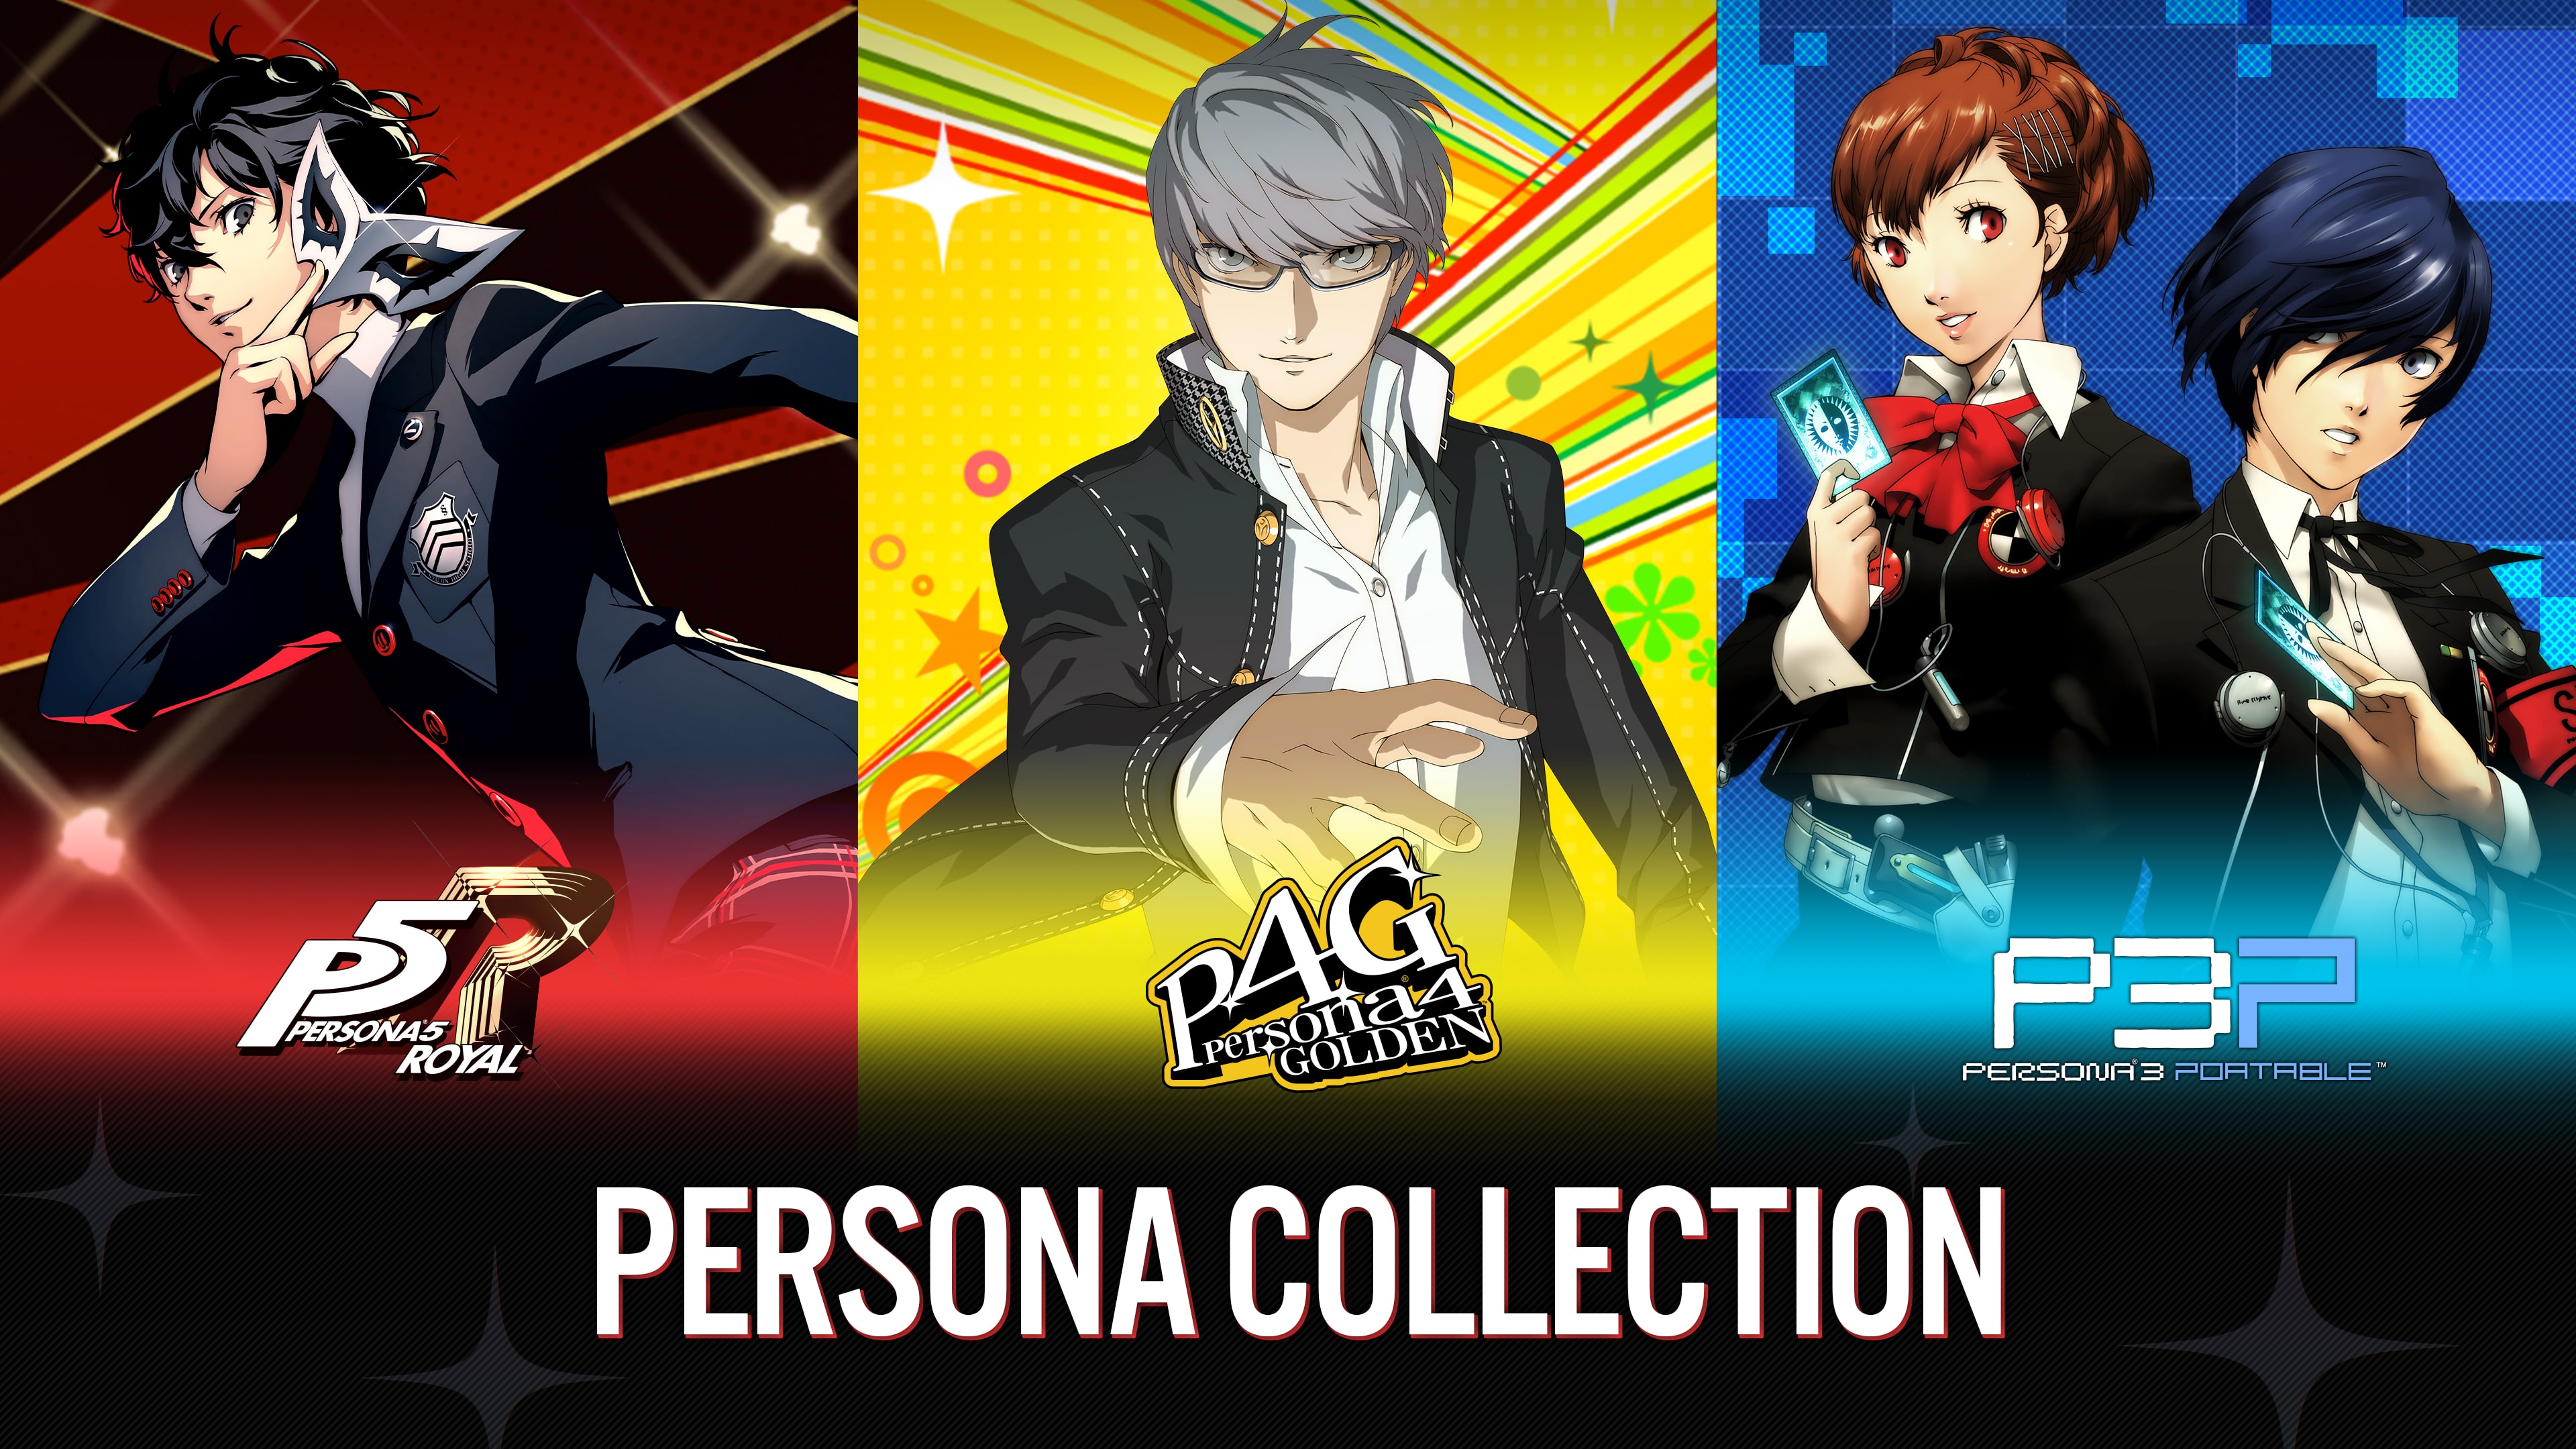 The Persona Collection